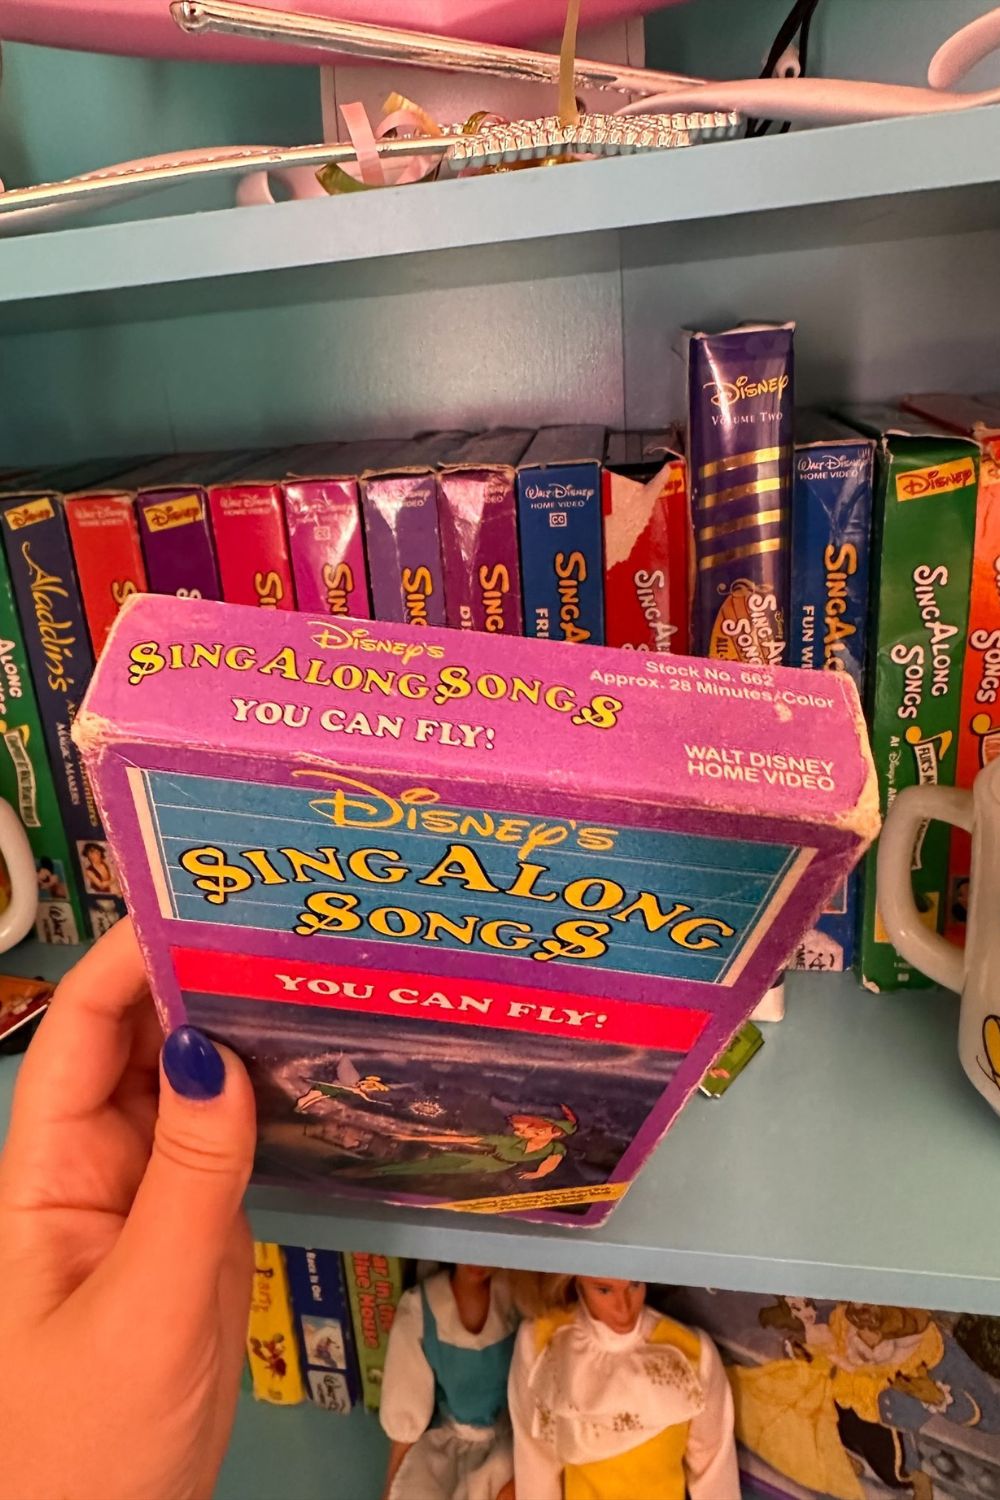 YOU CAN FLY SING ALONG SONGS VHS*